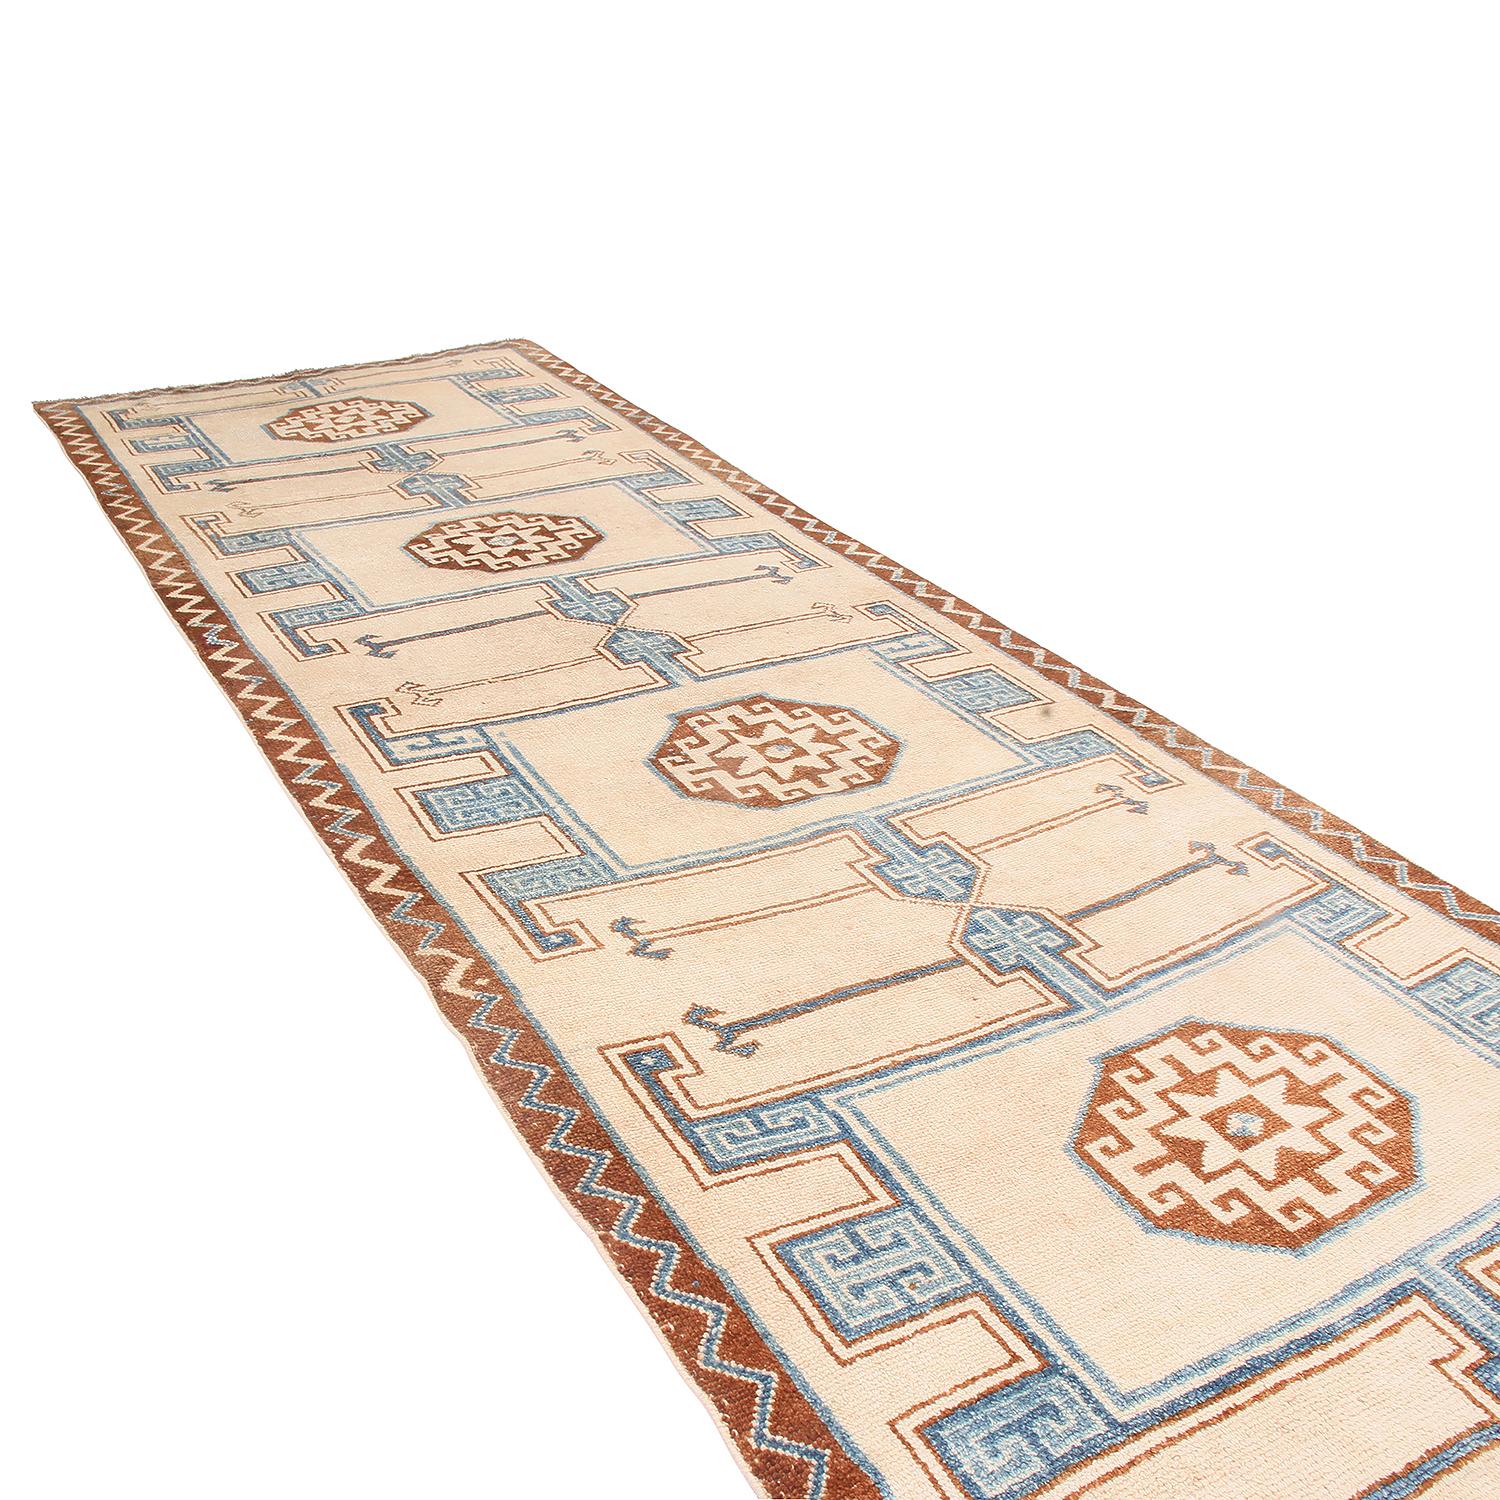 Hand knotted in wool originating from Turkey, this midcentury runner enjoys one of the most uncommon paginations of colorways in this design among its collection, an inviting marriage of artisan beige and cream background with frost blue and brown